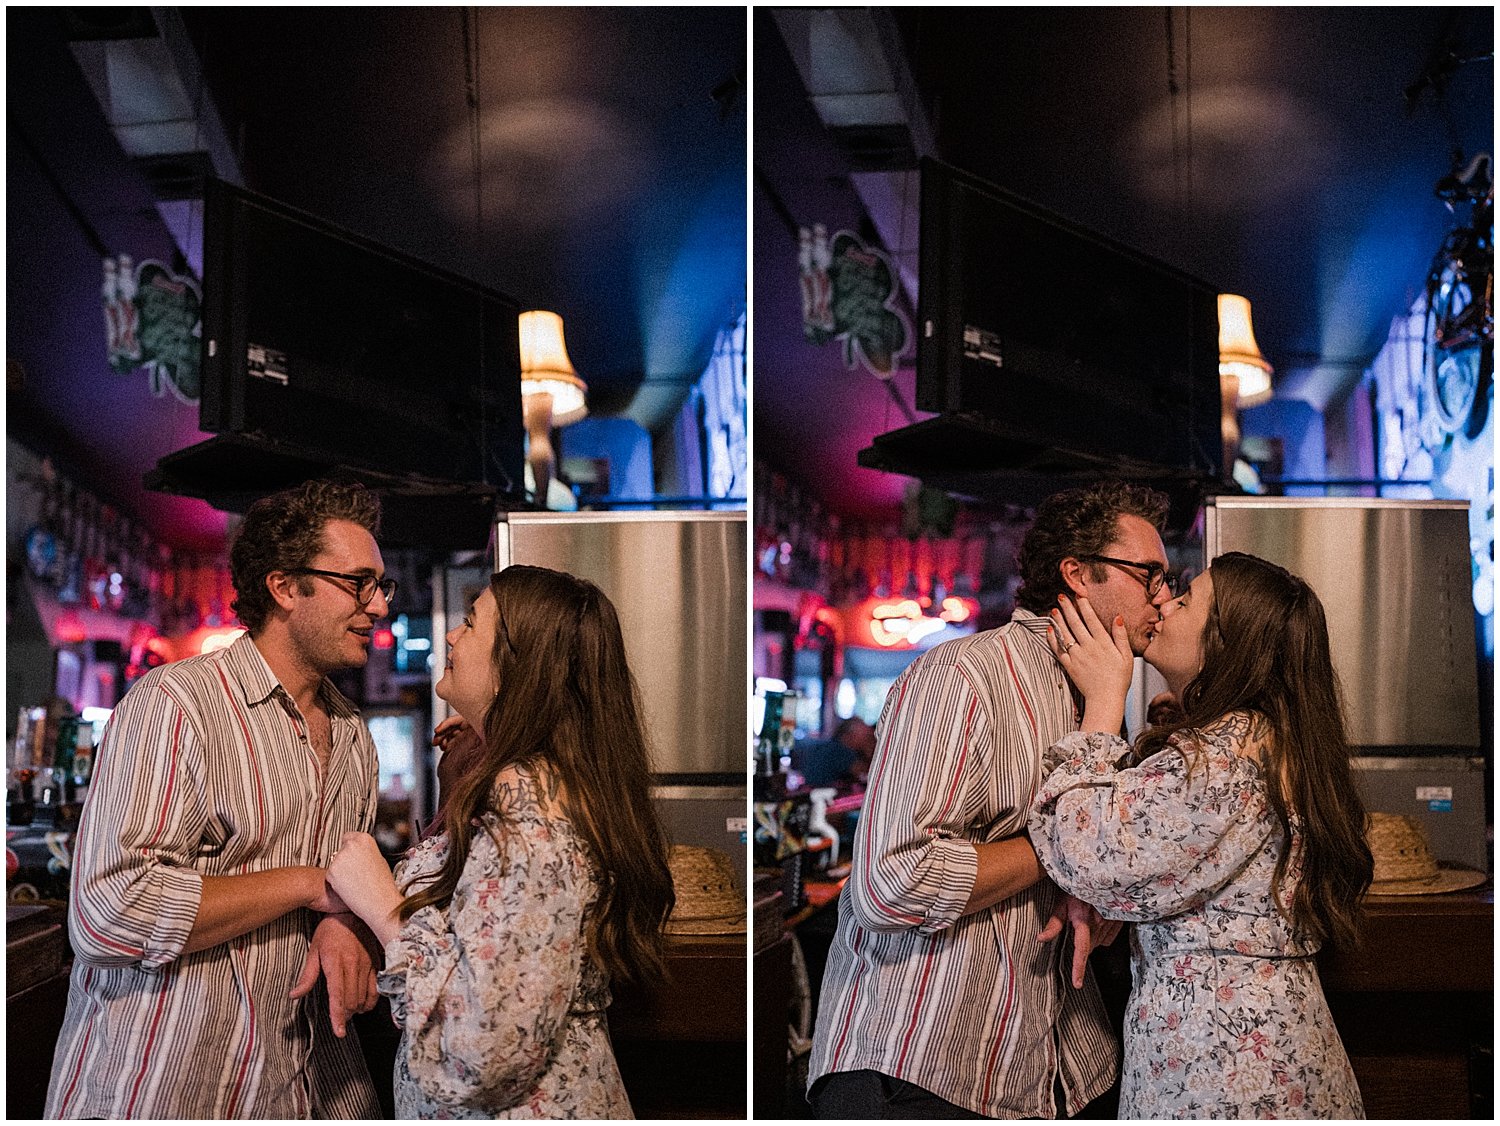 The Gulch Saloon Engagement Portraits | Yellow Springs, Ohio